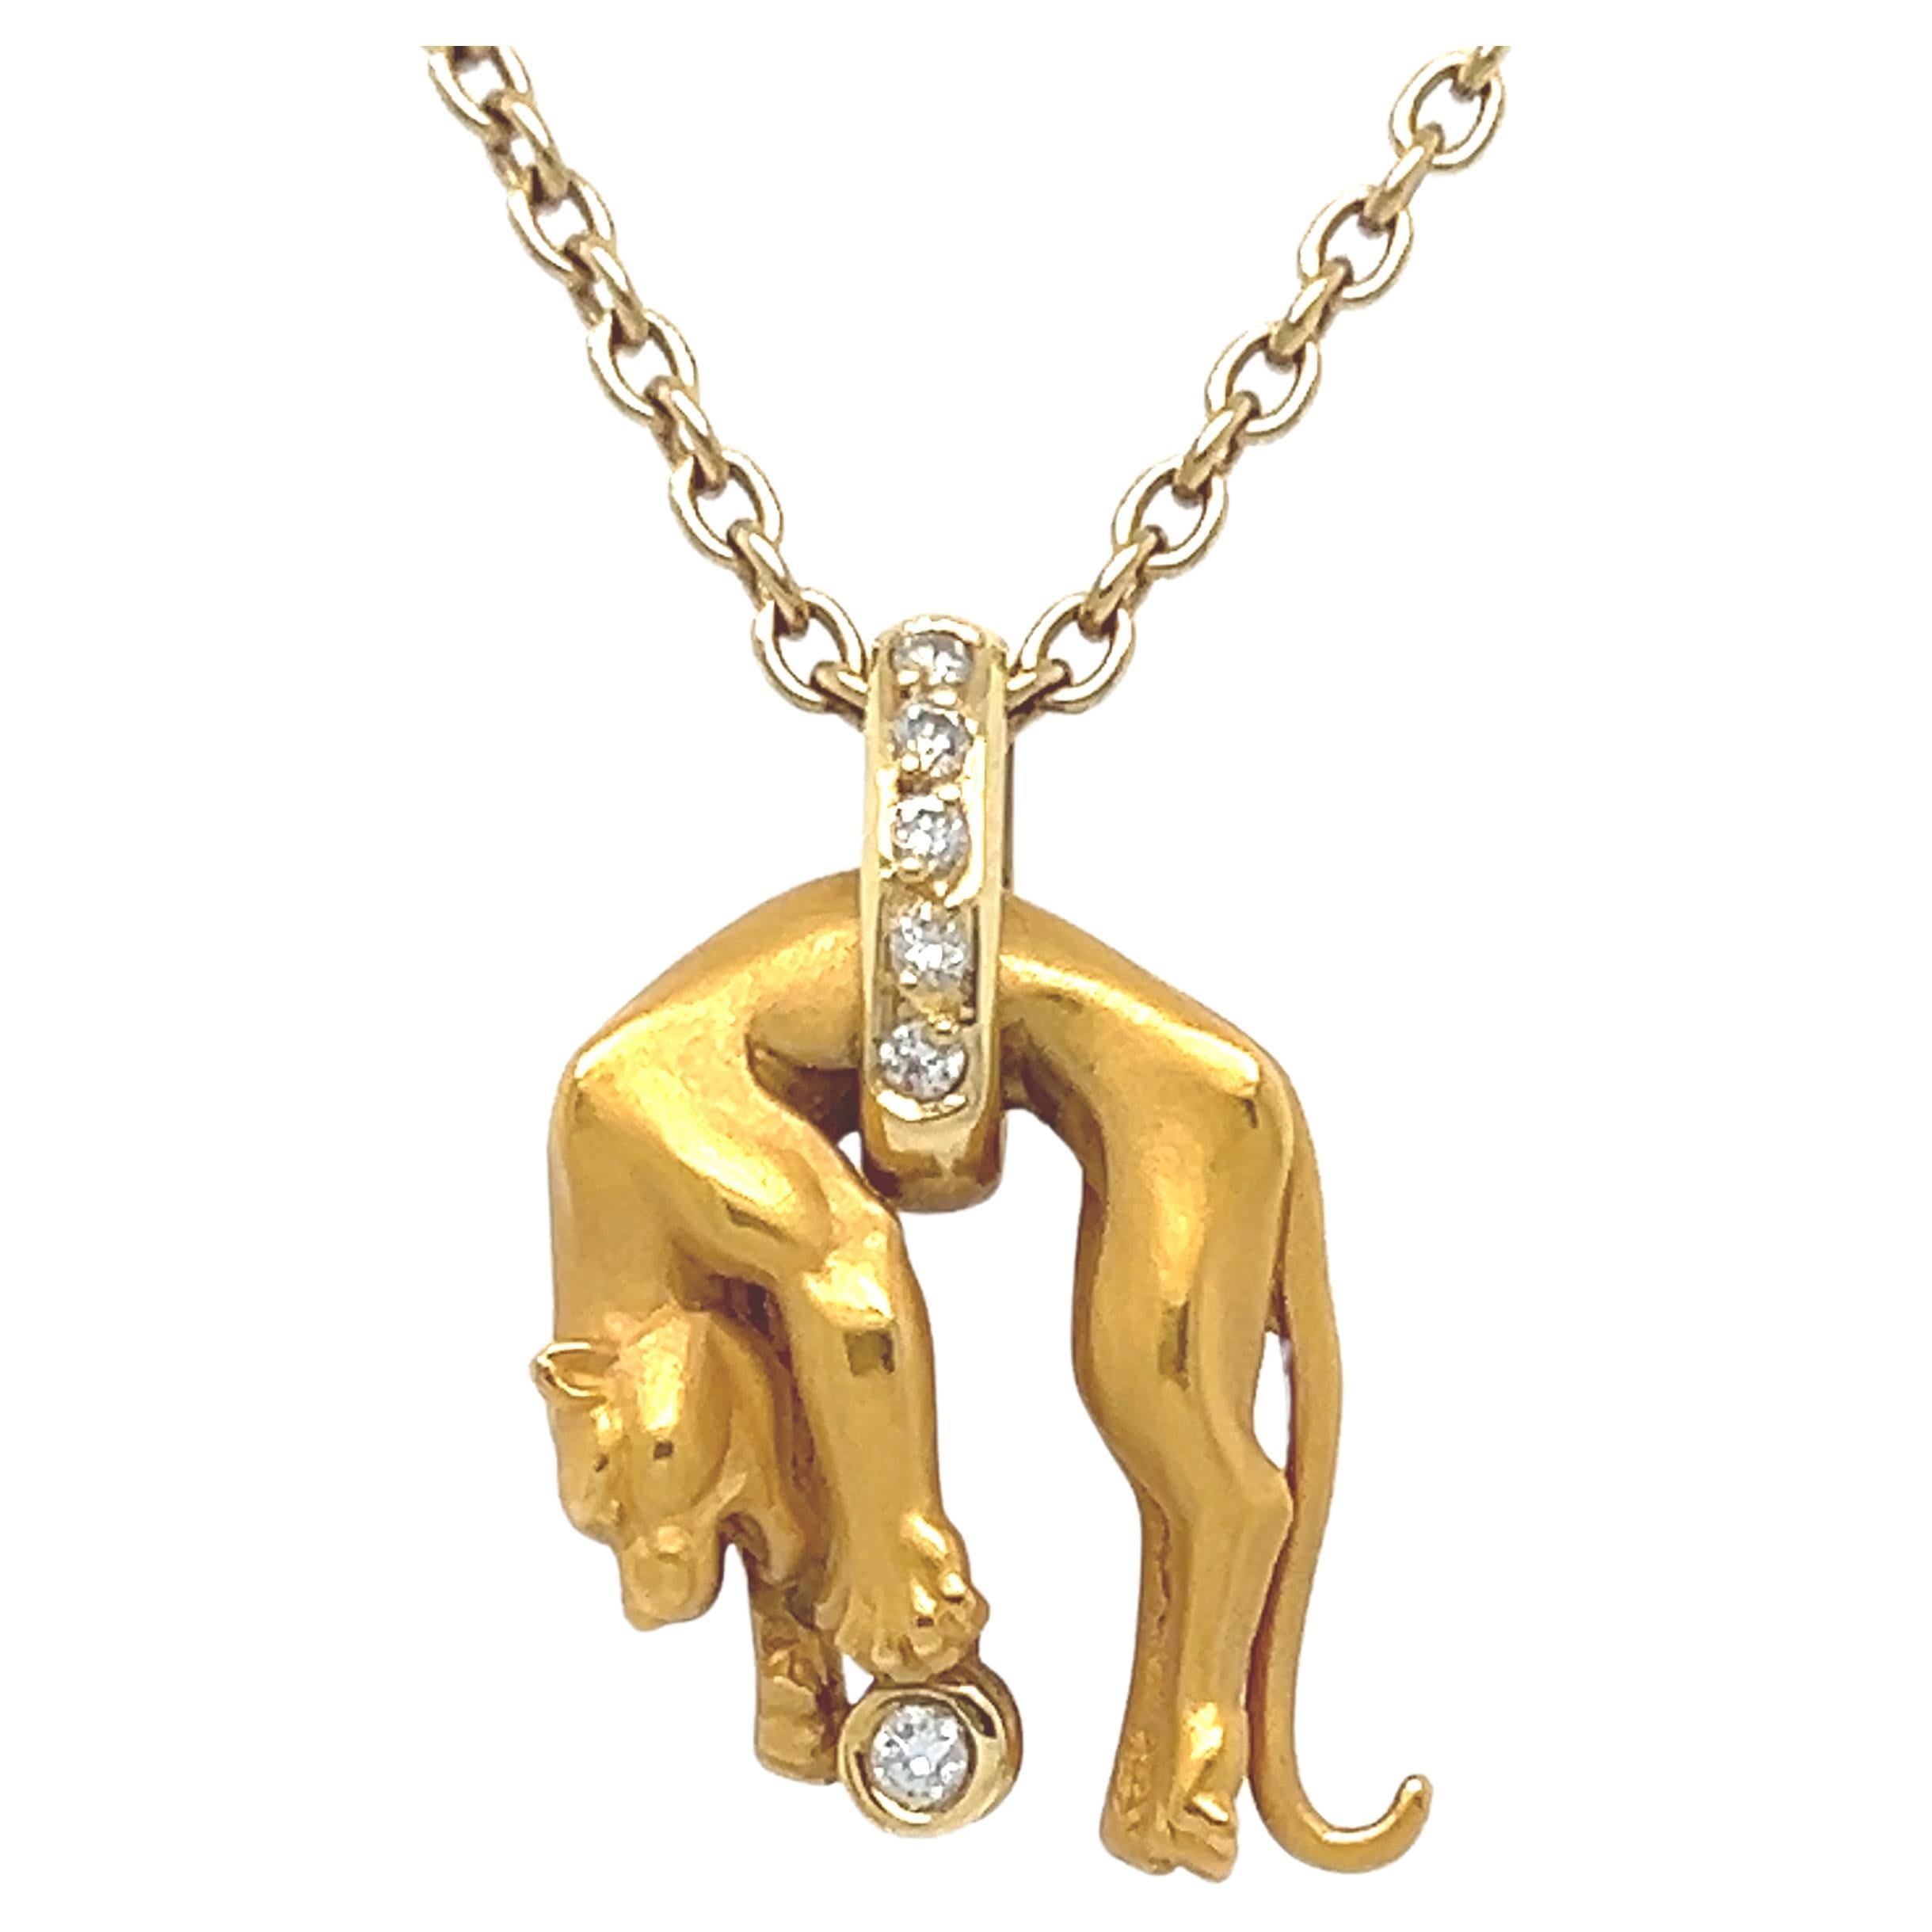 Vintage 18K Yellow Gold Carrera y Carrera Panther Pendant with Diamonds. 